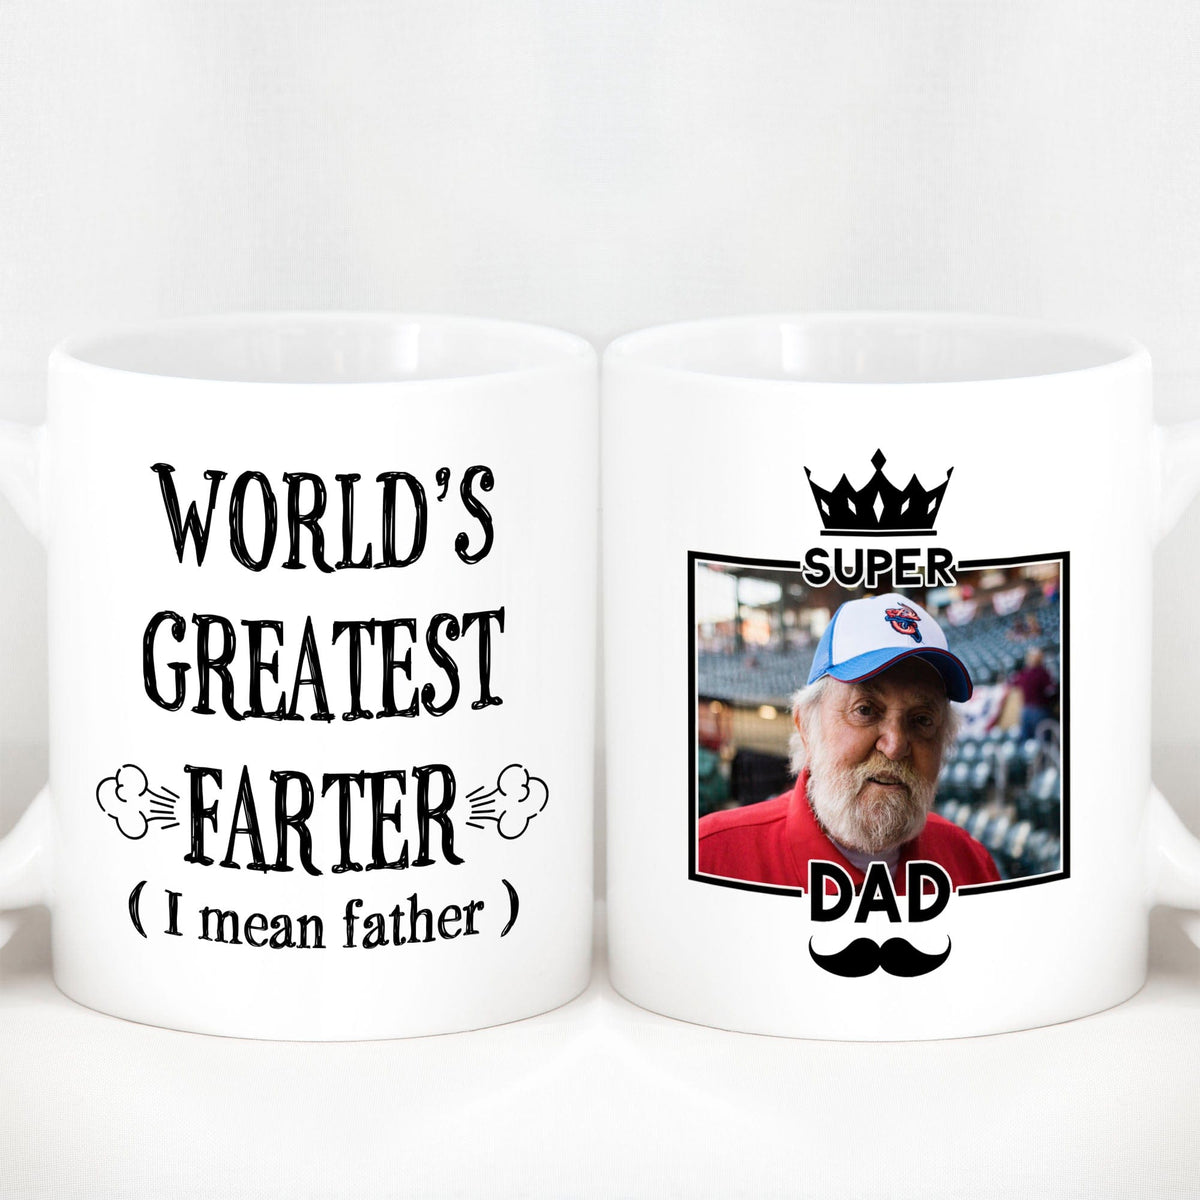 https://geckocustom.com/cdn/shop/products/geckocustom-cute-fathers-day-mug-funny-gift-for-dad-father-s-day-gift-from-daughter-world-s-greatest-farter-i-mean-father-dad-mug-from-son-c298-32001056112817_1200x1200.jpg?v=1650989847